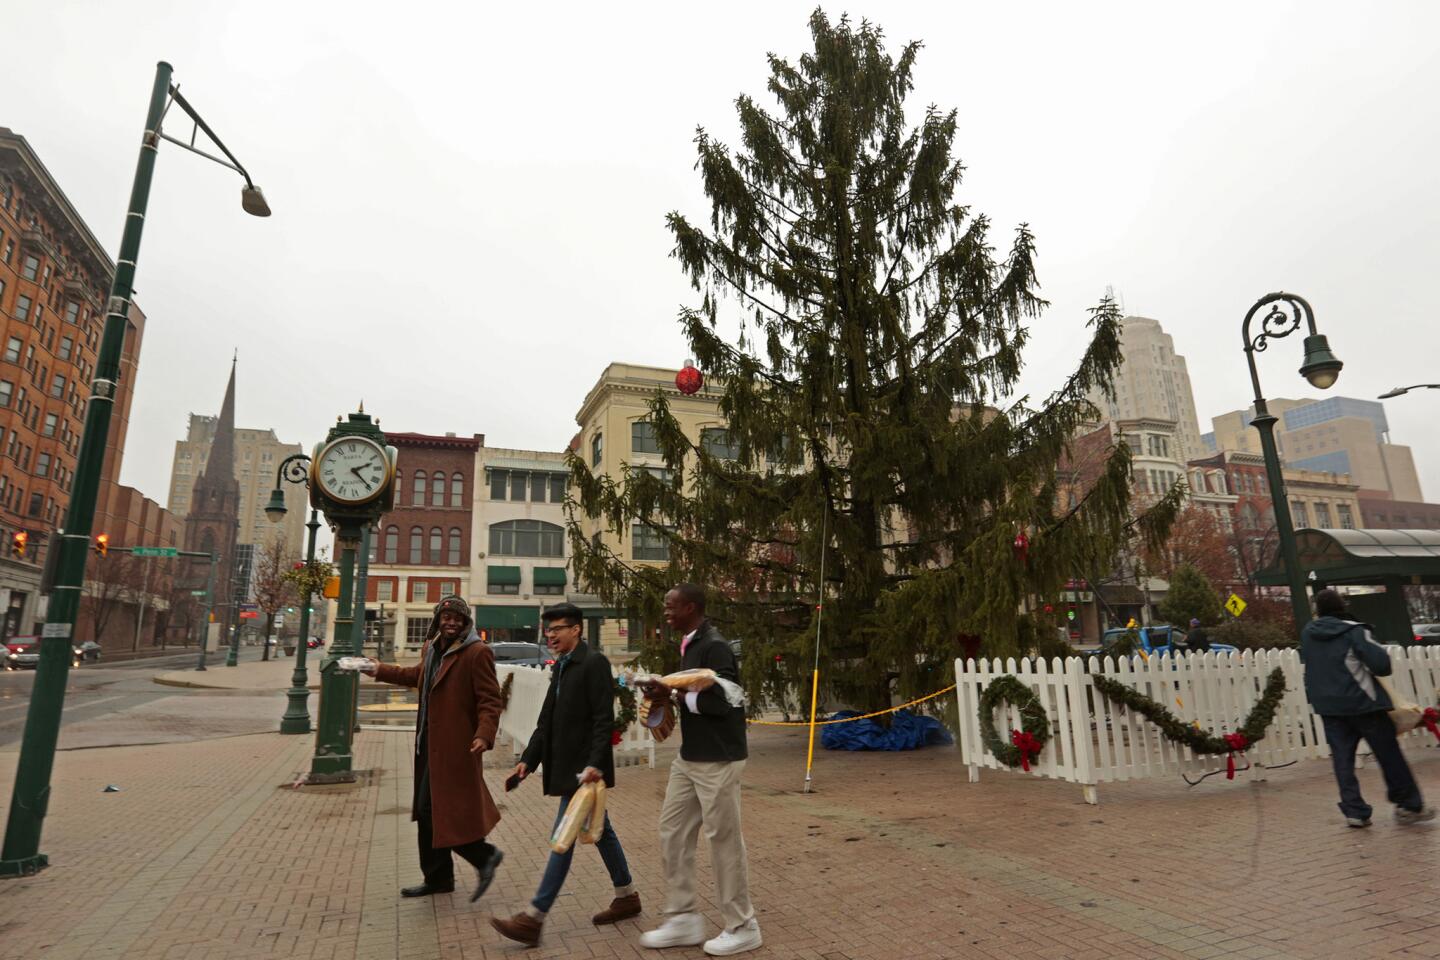 Reading, Pa., workers picked up the city's scrappy Christmas tree as a last-ditch substitute when mud prevented them from reaching the tree they'd been sent to get from a farm. Complaints followed.